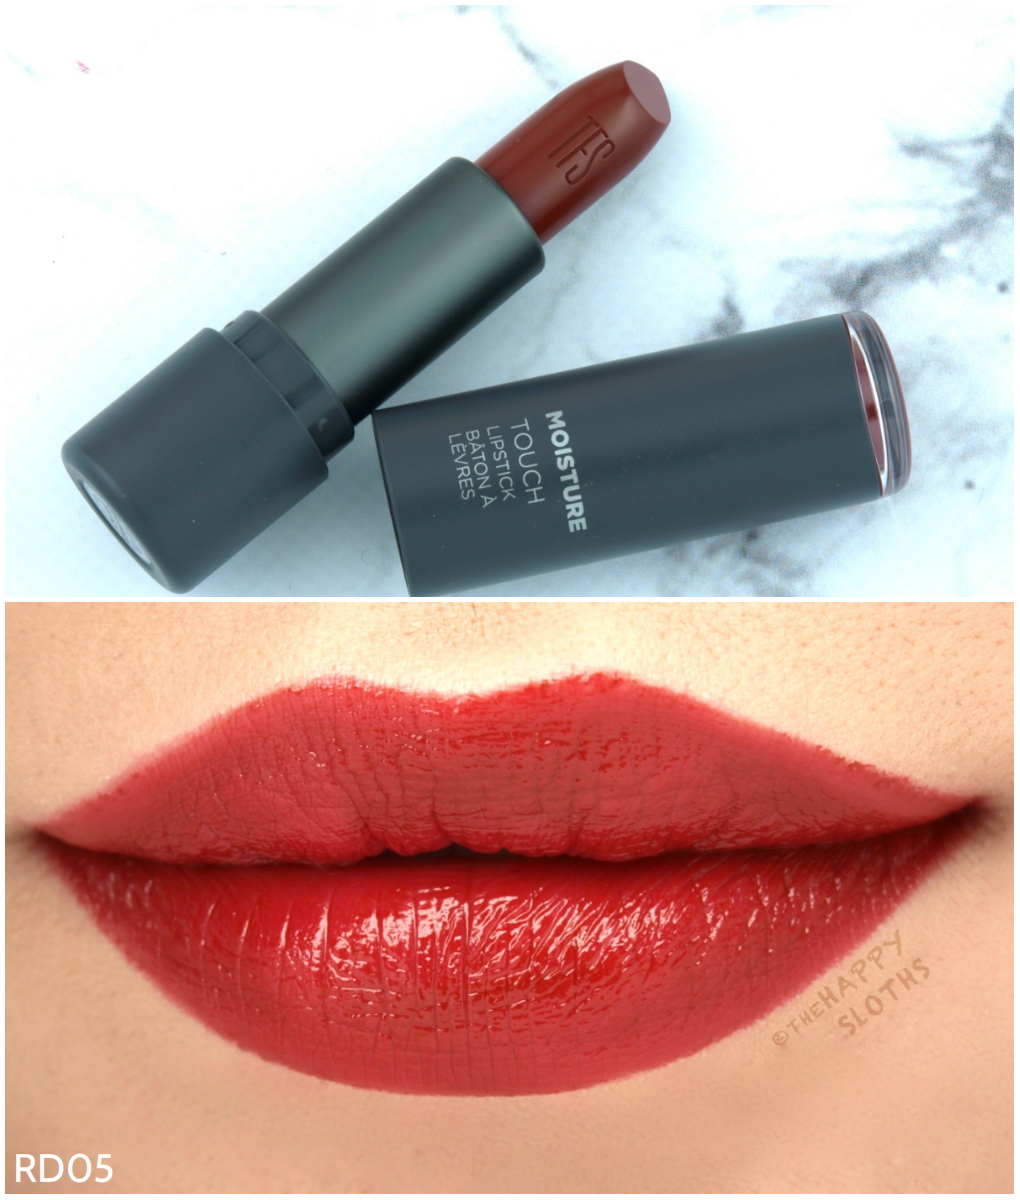 THEFACESHOP Moisture Touch Lipstick in "RD05 Smokey Red"